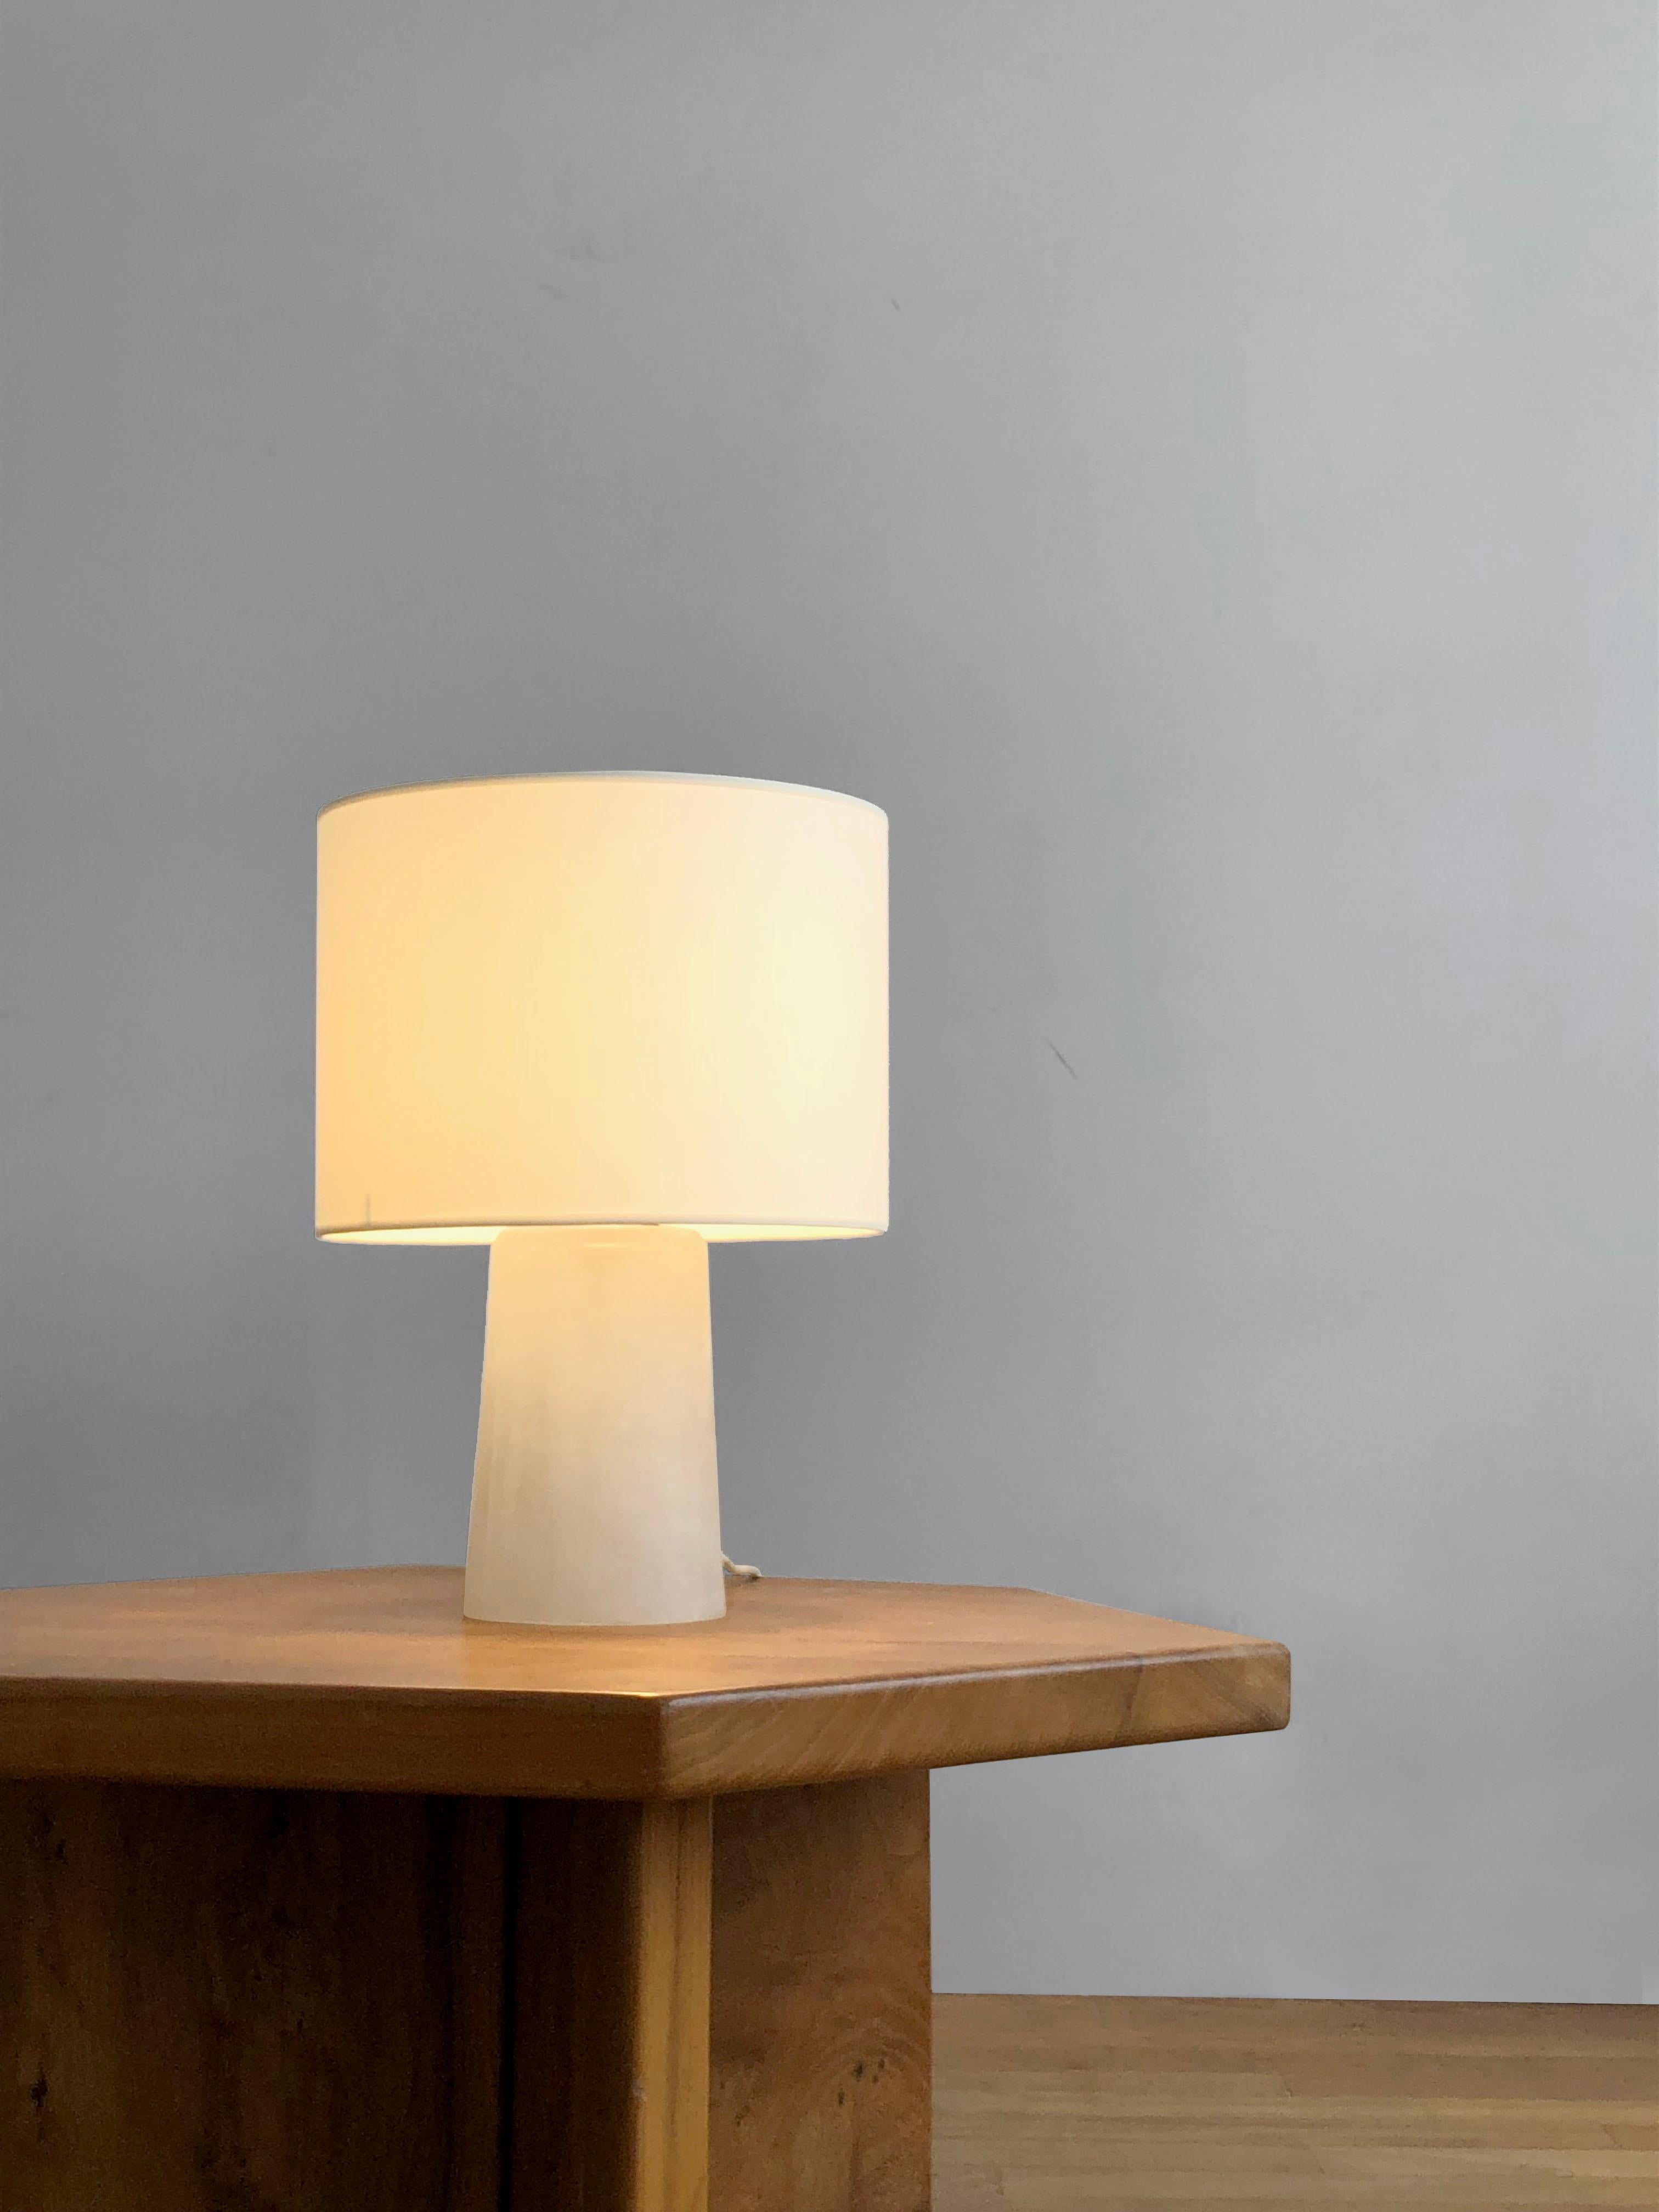 A simple, sensual and imposing table lamp, Space-Age, Post-Modernist, Shabby-Chic, massive base in white granite Murano glass, white cylindrical lampshade, Cenedese signature acid-etched inside the lamp base, by Cenedese, Murano, Italy 1960.

The